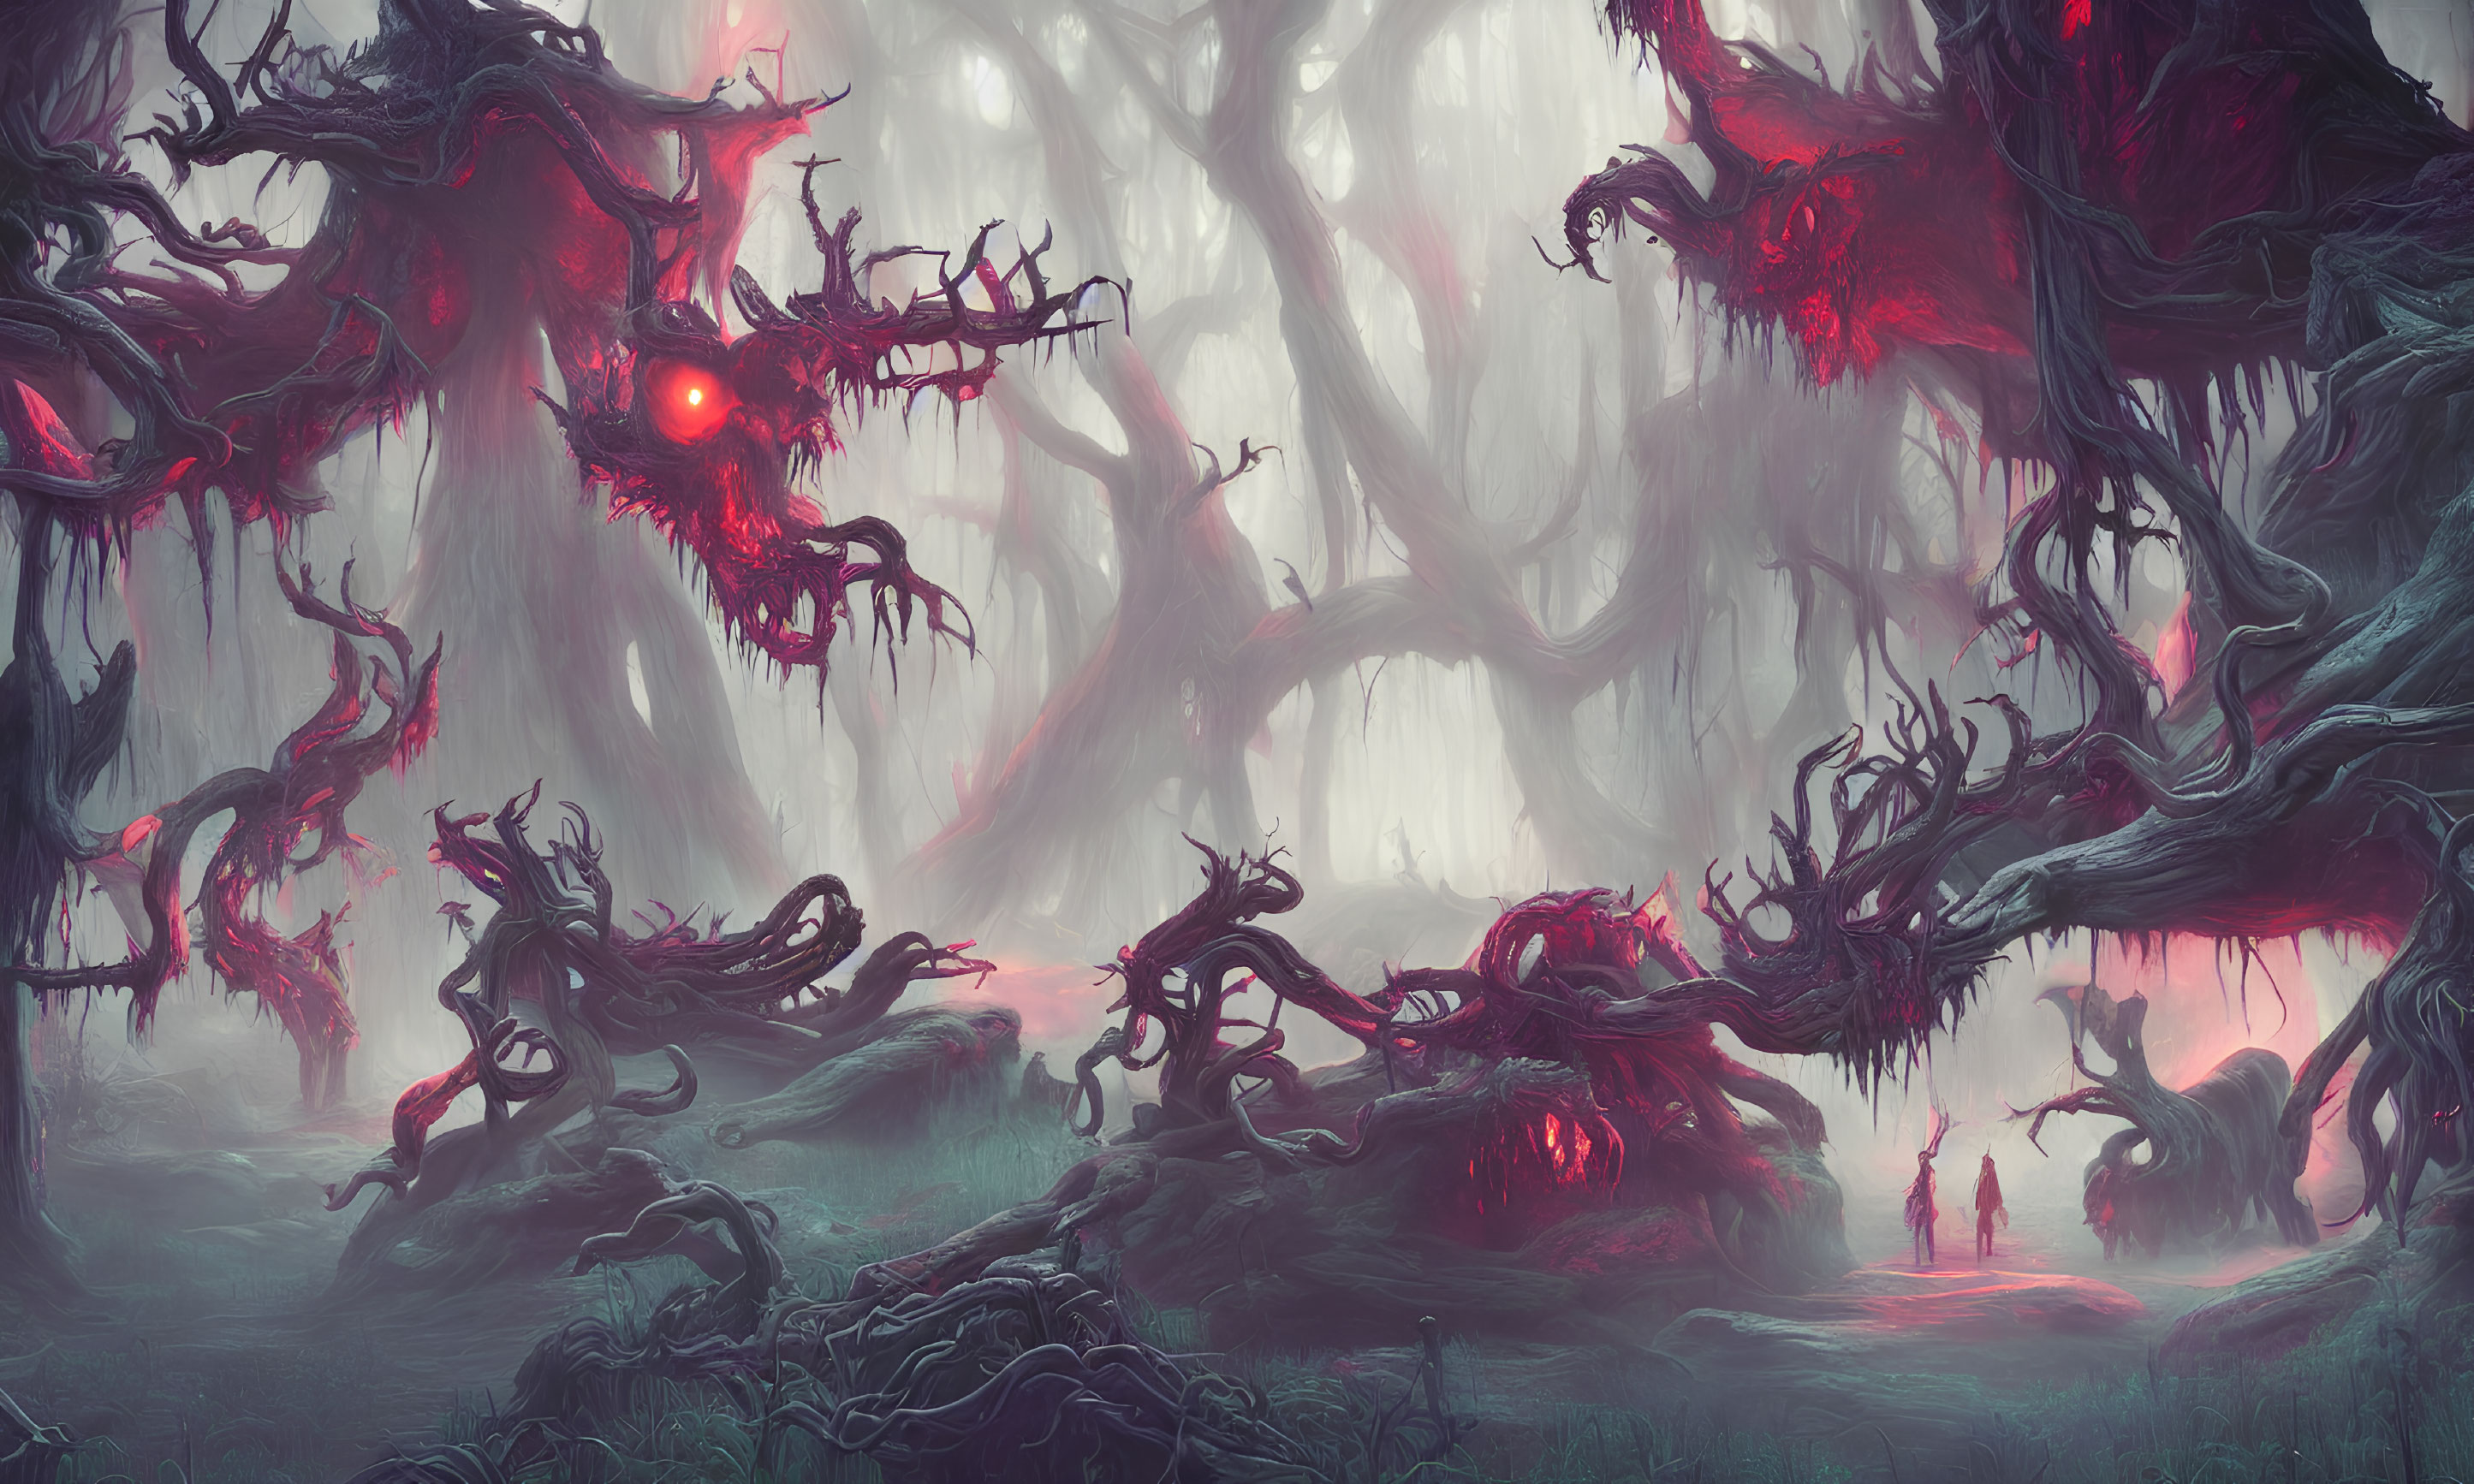 Mystical forest with twisted trees and eerie fog featuring small figures